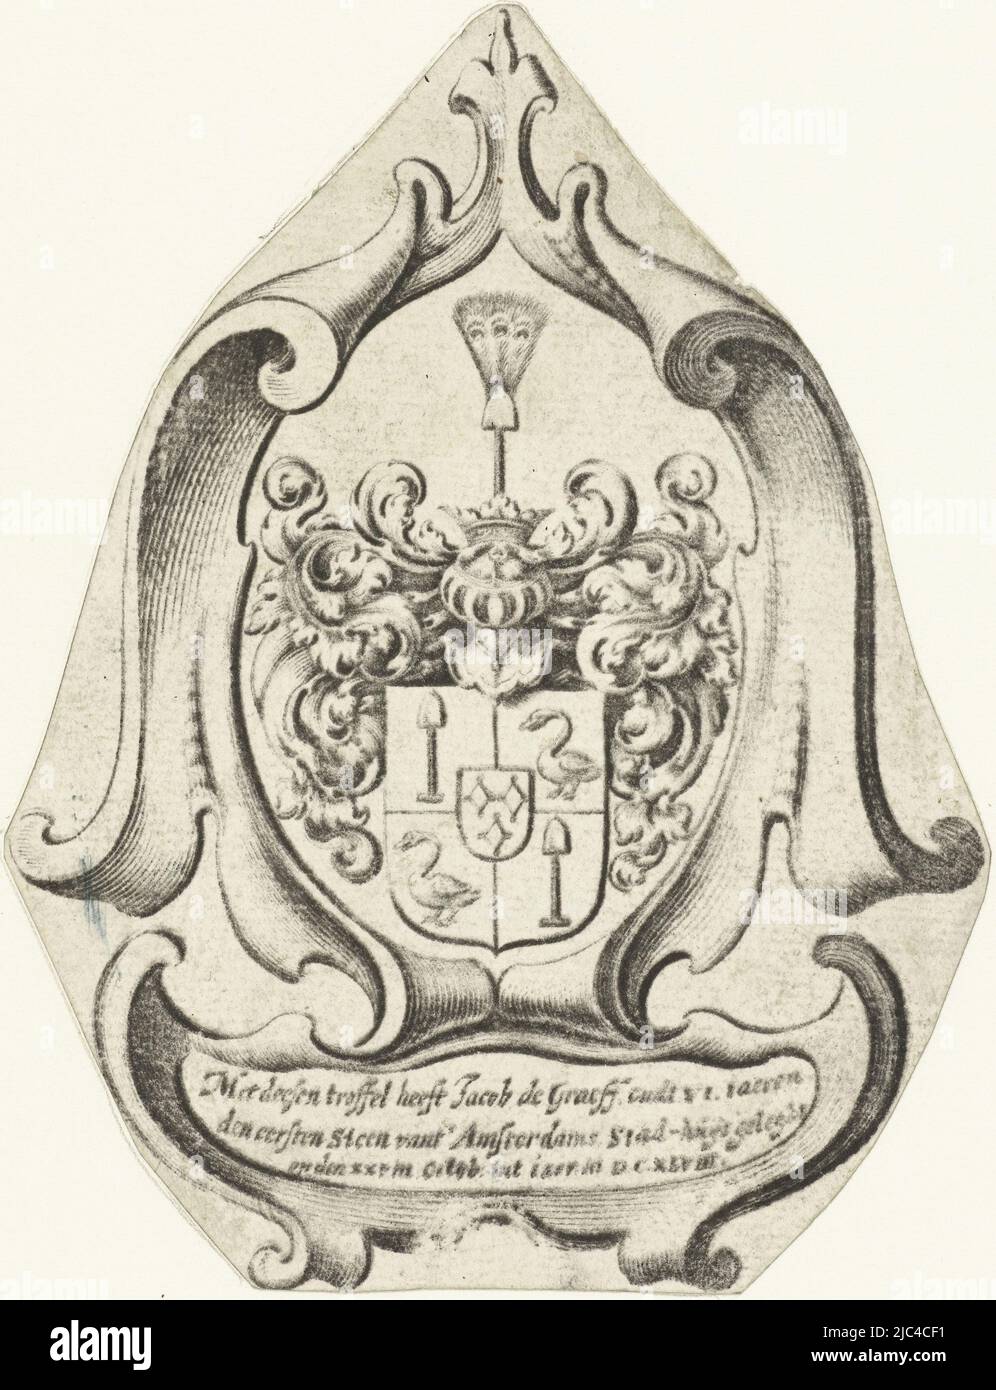 Counterprint of a print of an engraved image on the back of one of the silver trowels with which the first stone of the town hall in Amsterdam was laid on 28 October 1648, by Jacob, son of the mayor Cornelis de Graeff.., Labyrinth with coat of arms of De Graeff family With this trowel, Jacob de Graeff, aged VI years, laid the first stone of the Amsterdam Town Hall on October 28, 1648. , Johannes Lutma (1584-1669), print maker: anonymous, Amsterdam, print maker: Netherlands, (possibly), 1648, paper, engraving, h 115 mm × w 87 mm Stock Photo